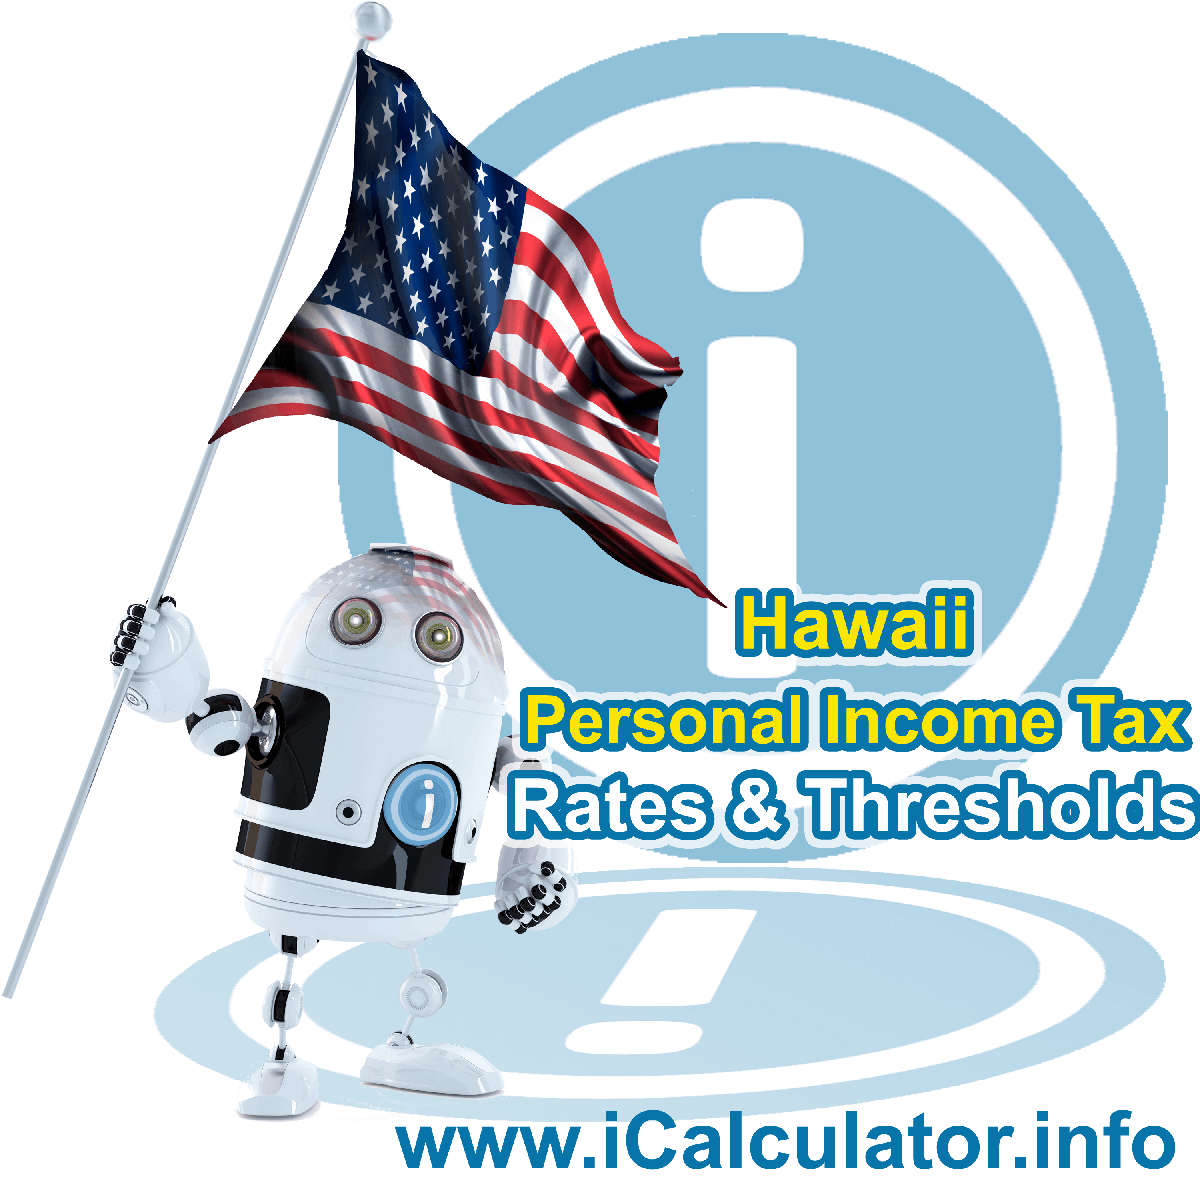 Hawaii State Tax Tables 2022. This image displays details of the Hawaii State Tax Tables for the 2022 tax return year which is provided in support of the 2022 US Tax Calculator